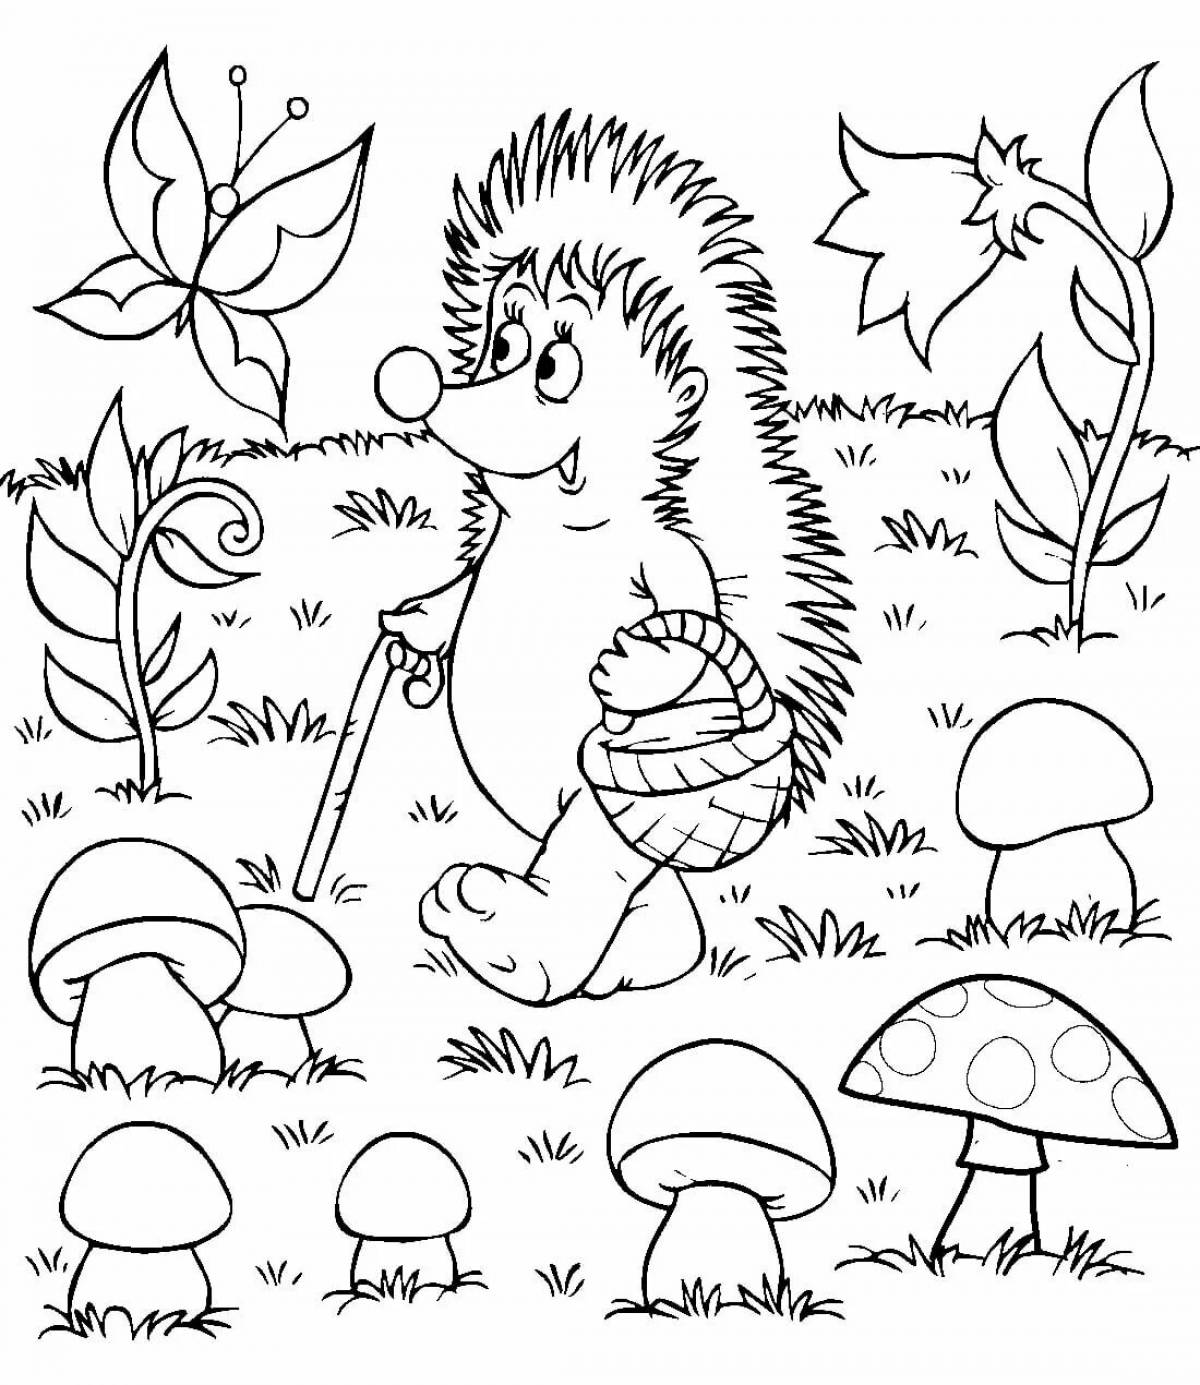 Hedgehog in the forest #1